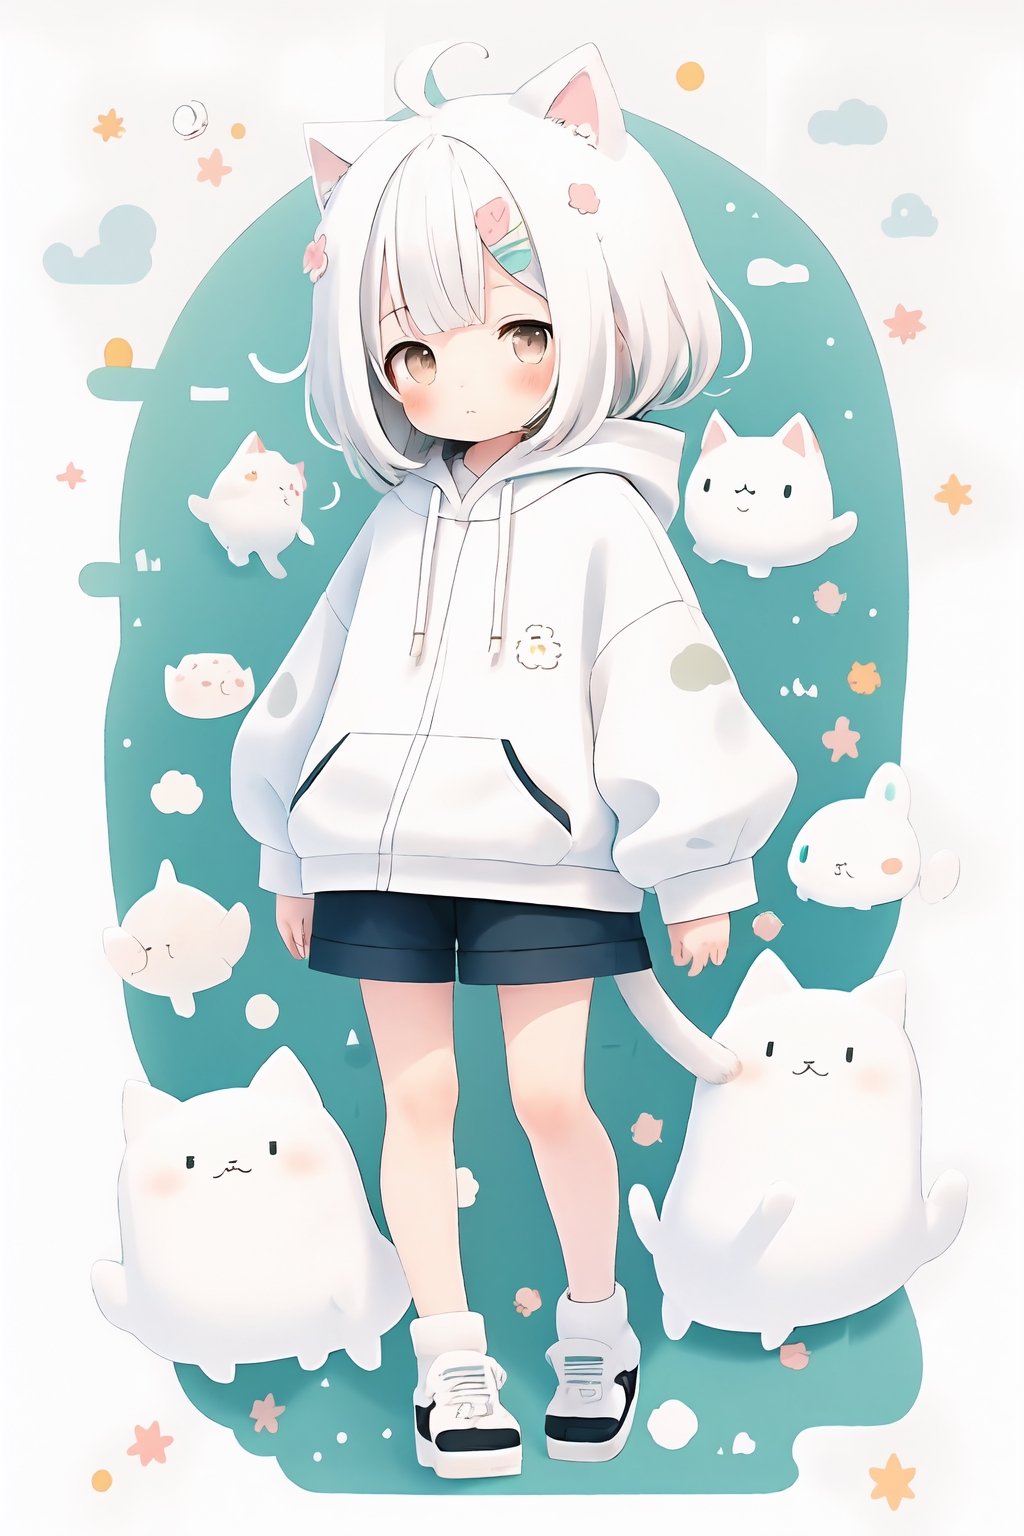 style of Chiho Aoshima, adorable, cute, a boy, cat ears, white hair, white hoody on, full body, warm colors, simple white background, in clouds, Illustration, cover art, japan, minimalistic, eguchistyle,toitoistyle,cutestickers